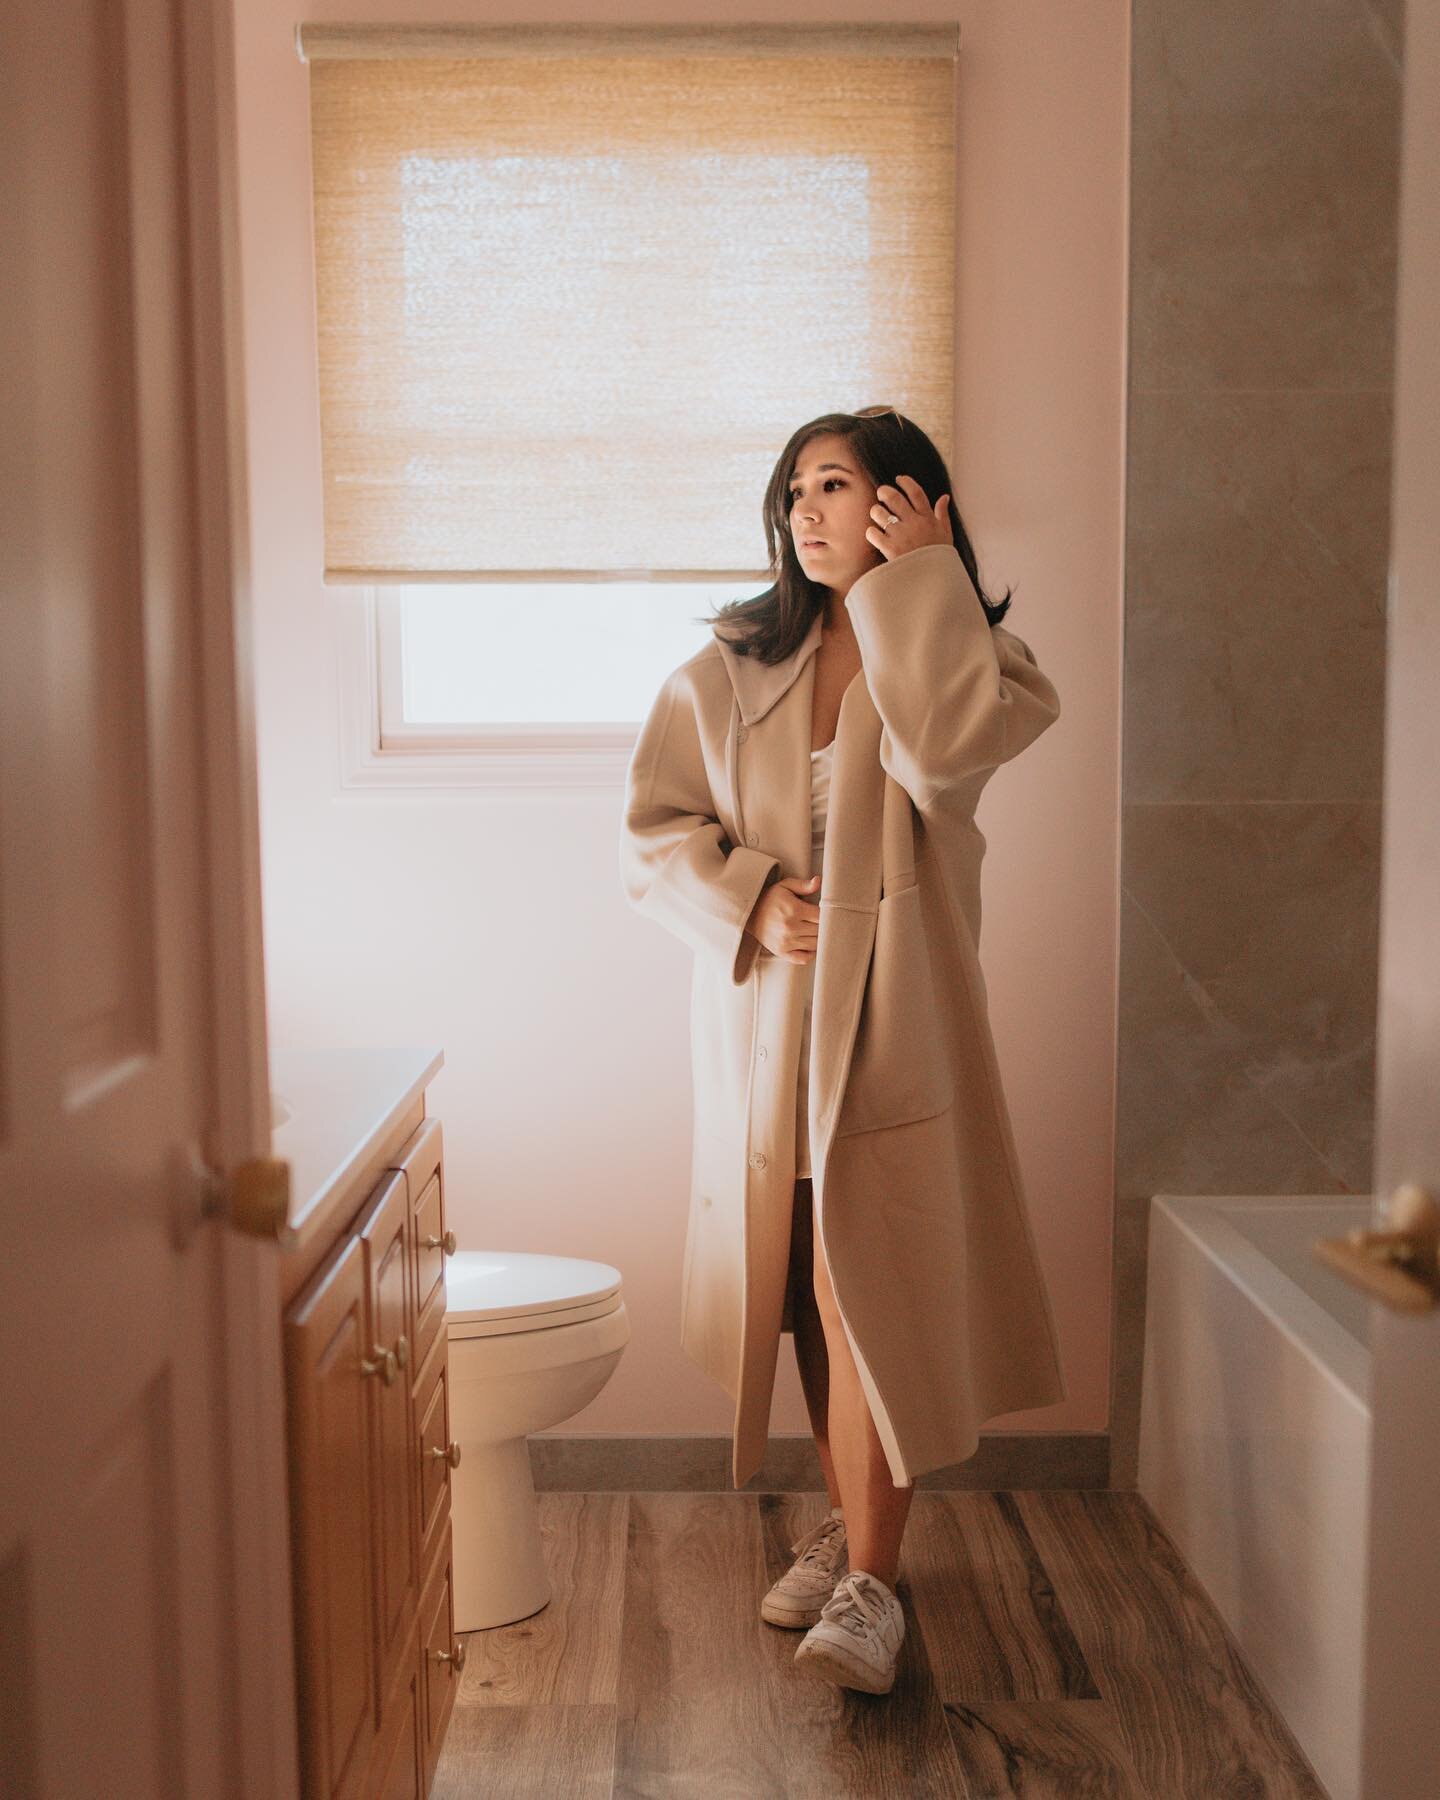 Spring renovations, check. 💗🌷Our new guest bathroom feels like we&rsquo;ve stepped into a ladies tea salon, and I&rsquo;m feelin&rsquo; like a lady in my new coat! @lit_activewear My go-to favorite to elevate any outfit, and has been especially per